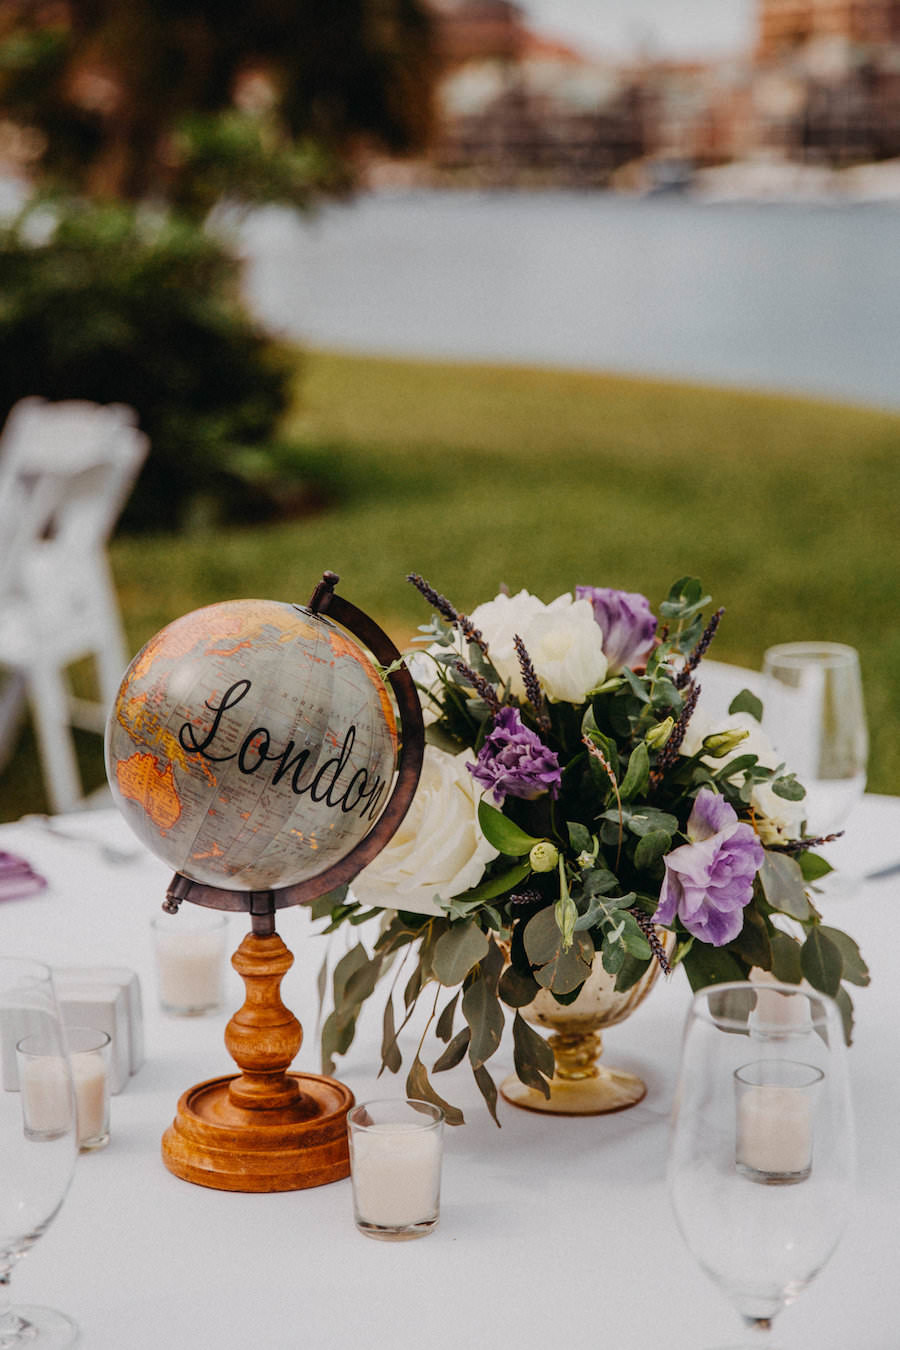 Outdoor Garden Wedding Reception Decor with Purple and White Flowers and Succulent Greenery Centerpieces with Globe Table Number | Travel Themed Wedding Inspiration